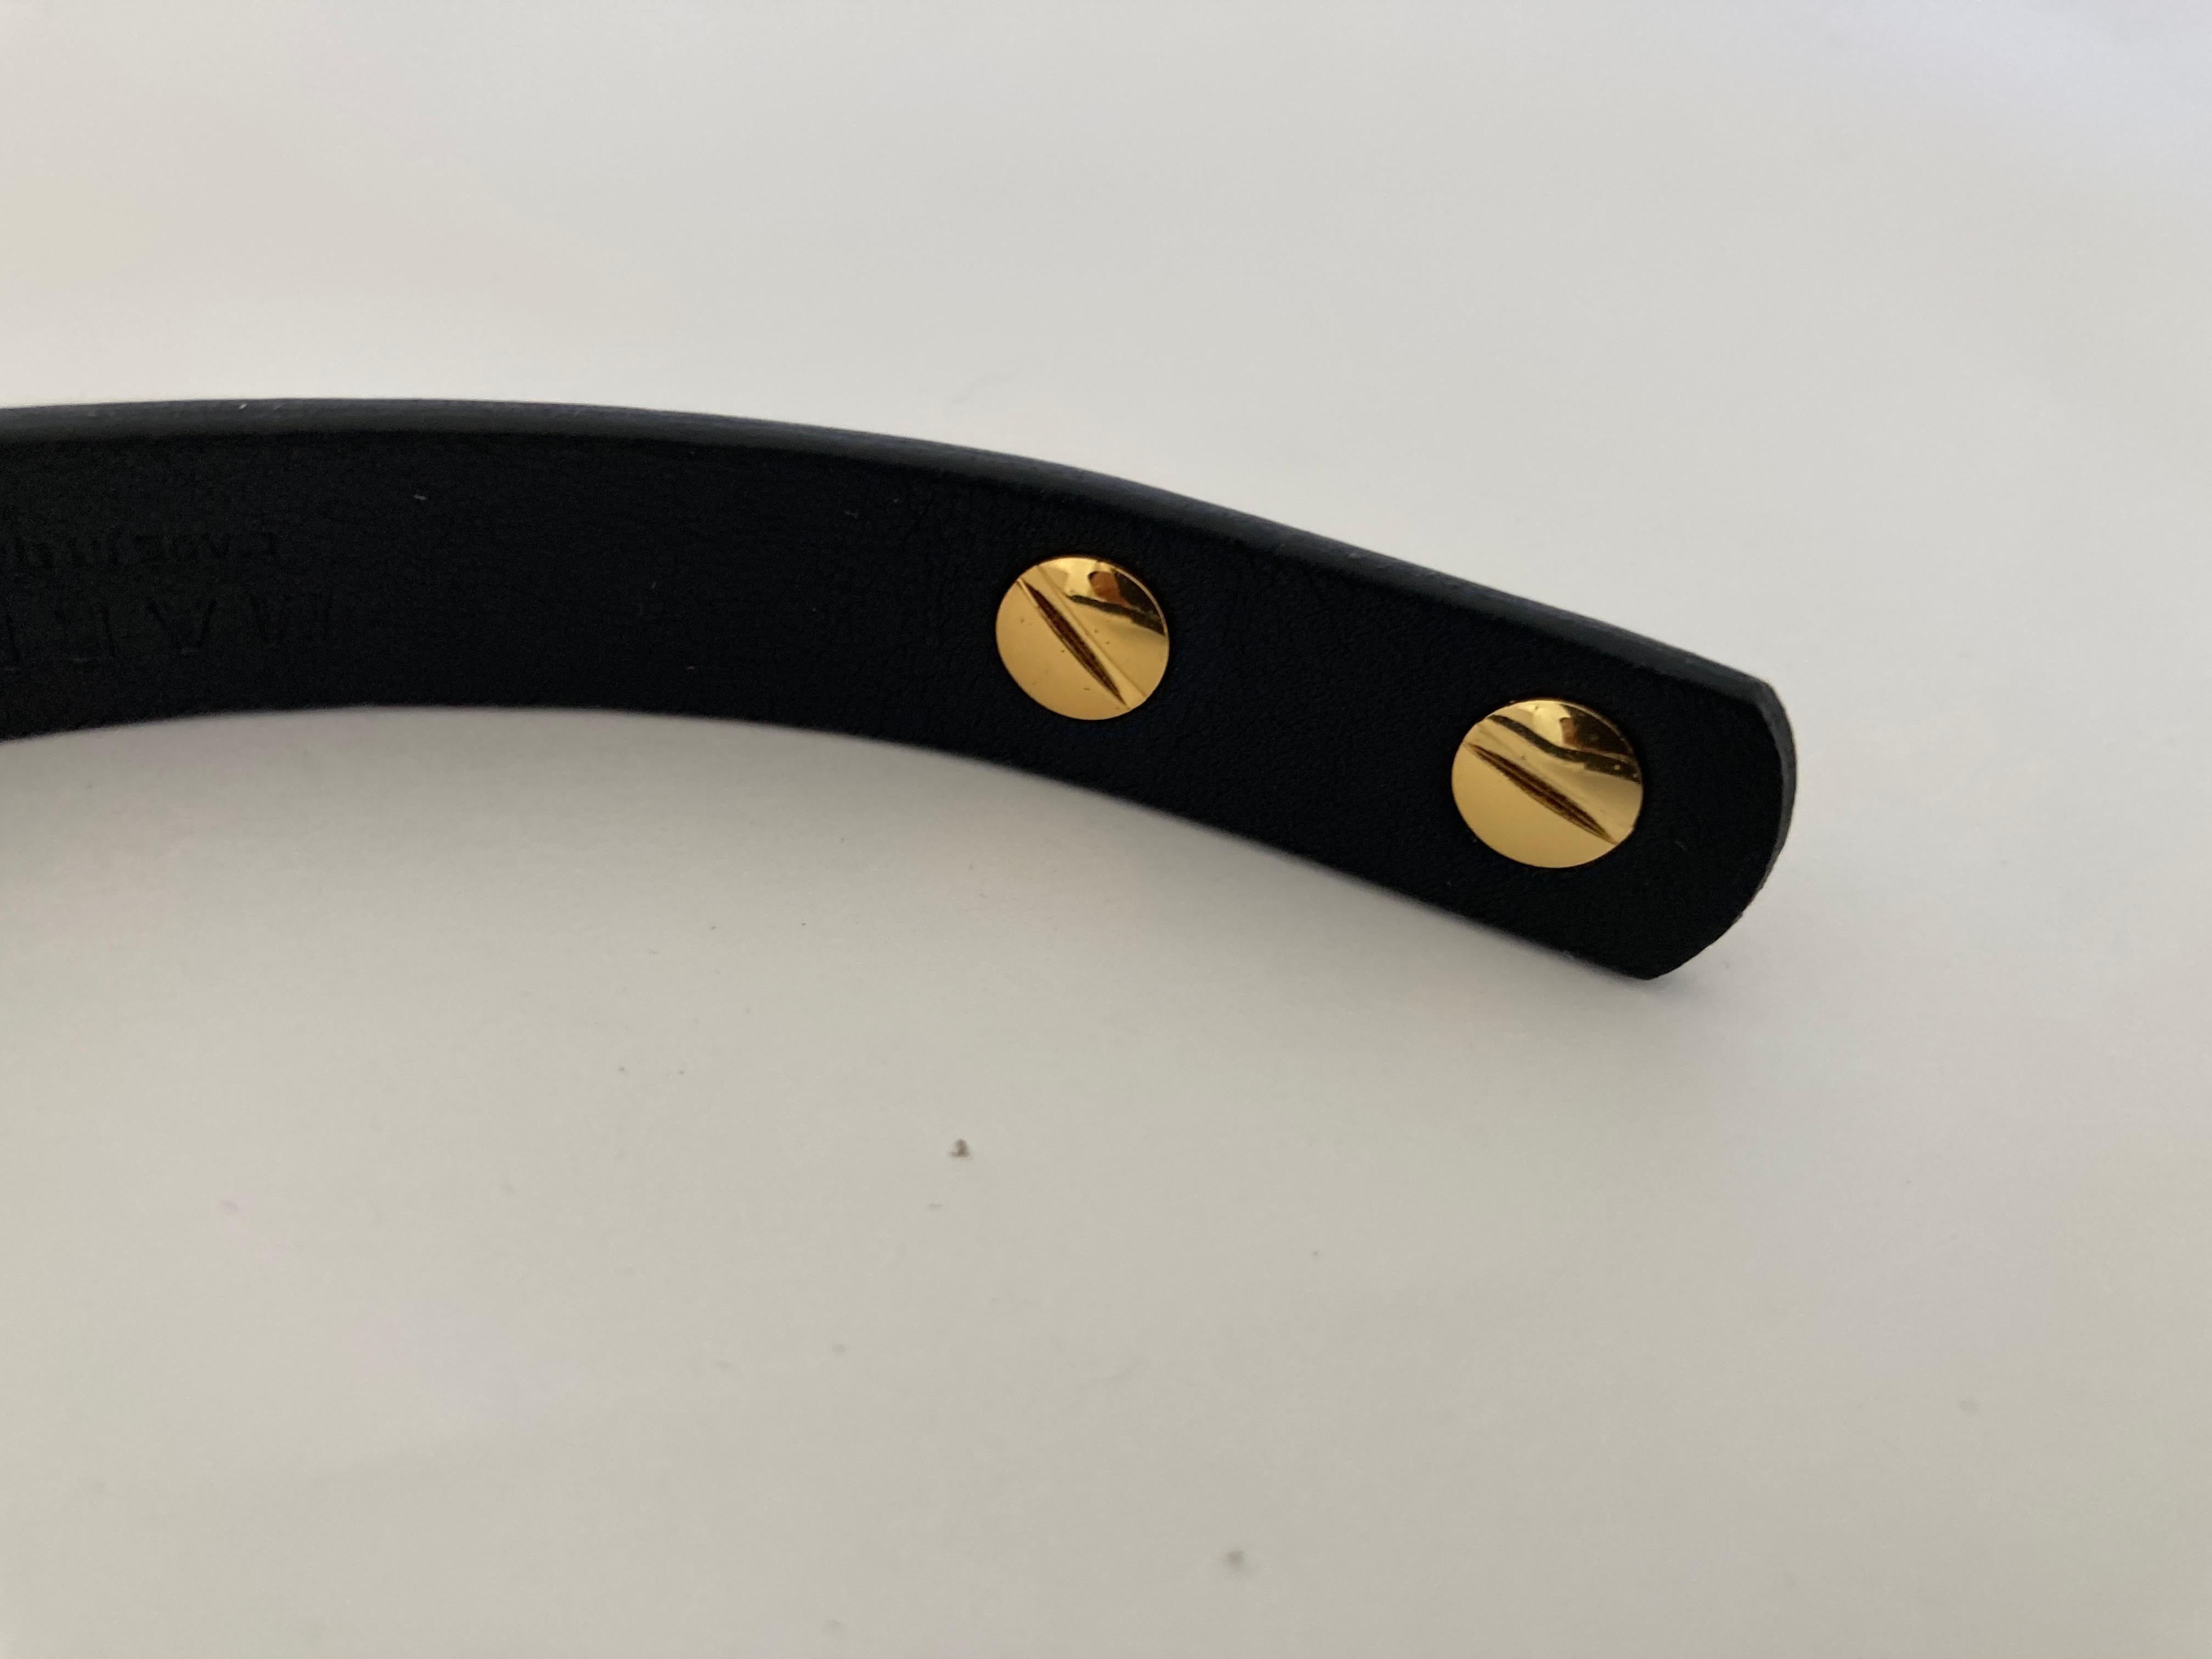 Marni black leather belt with gold bow. Women black lamb leather belt with bow by Marni. 
Utterly chic never worn early 2000s Marni leather bow belt. 
Can really take a basic outfit to a whole other level. 
Perfect over a dress, with a skirt, or